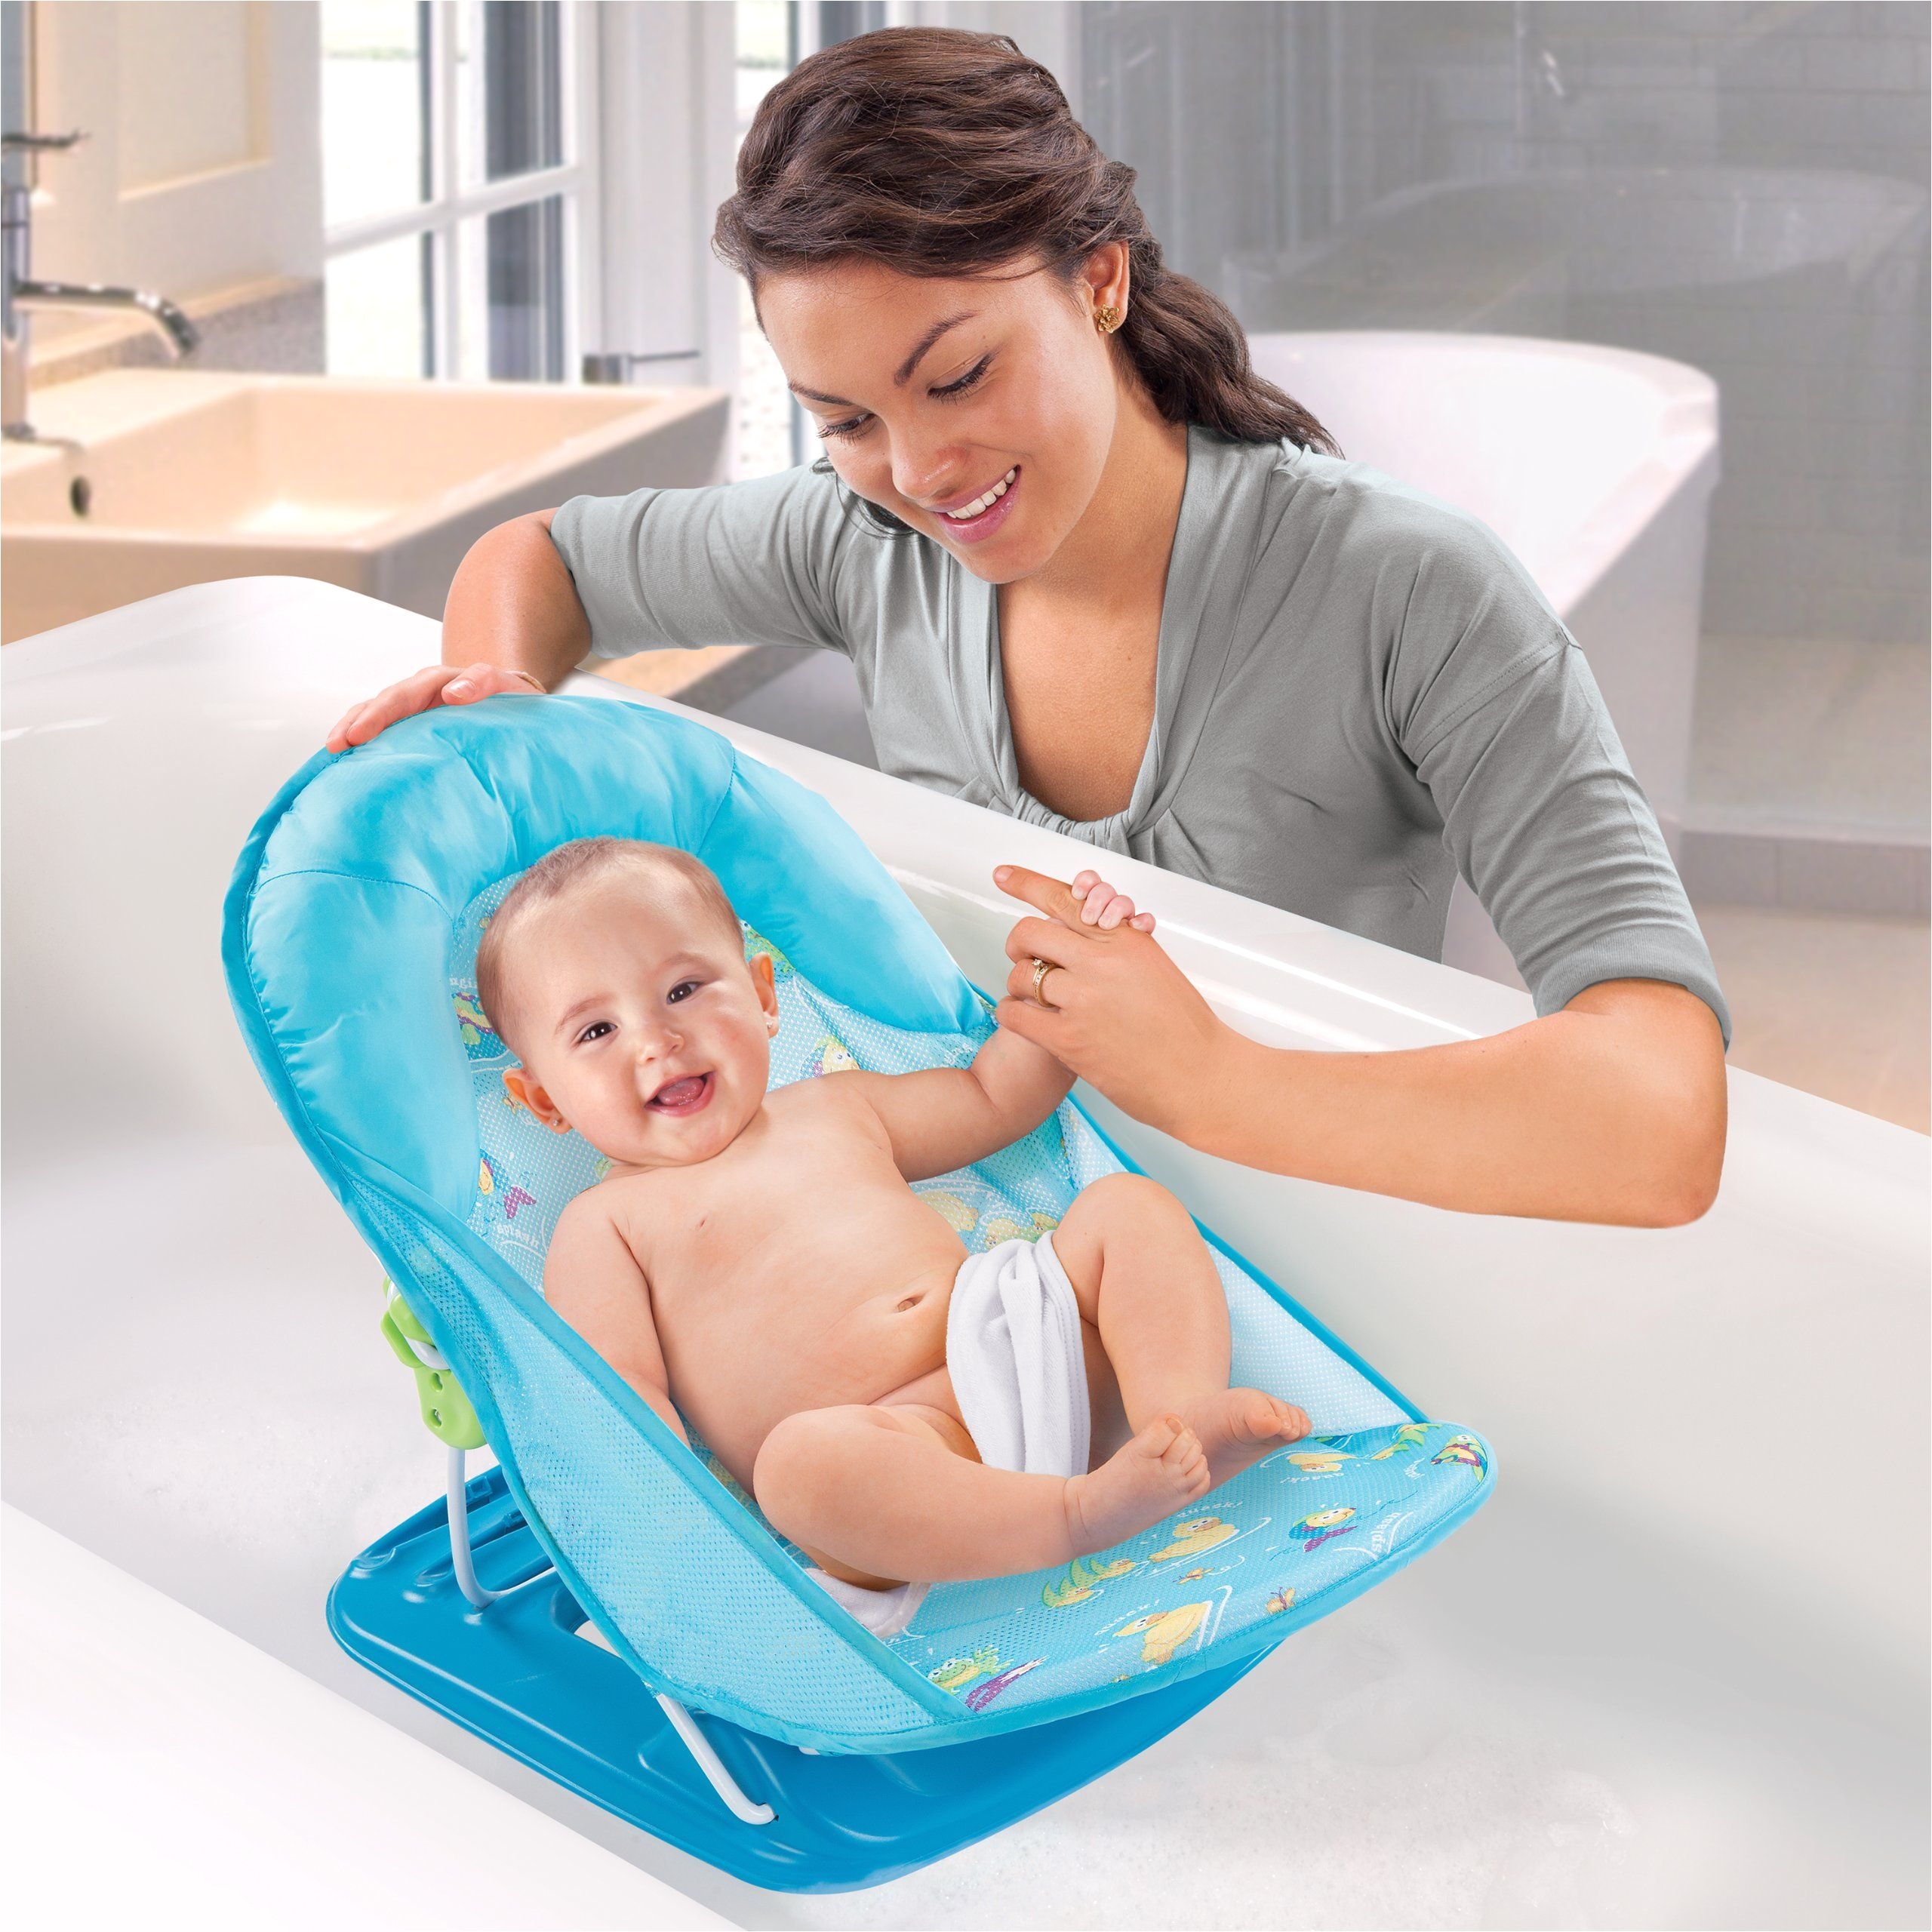 amazon com summer infant mothers touch deluxe baby bather blue baby bathing seats and tubs baby my sister uses this tub for baby and places it in